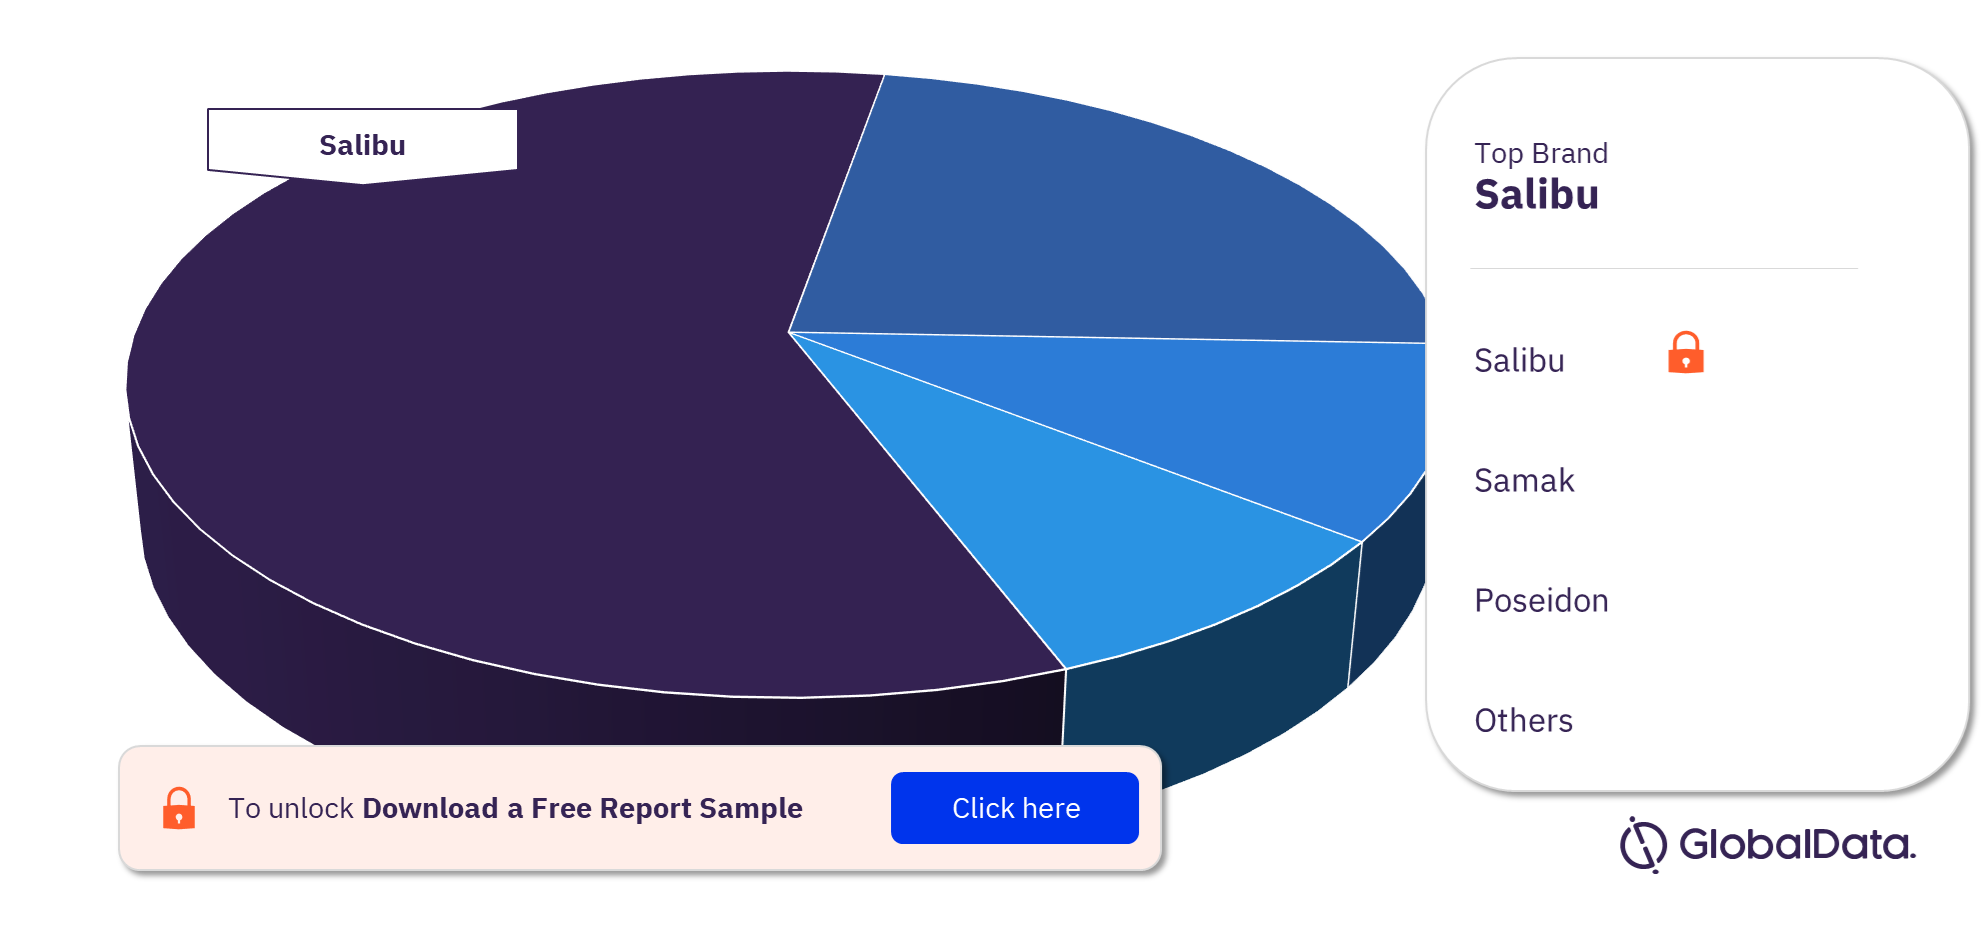 Egypt Frozen Fish & Seafood Market Analysis by Brands, 2021 (%)